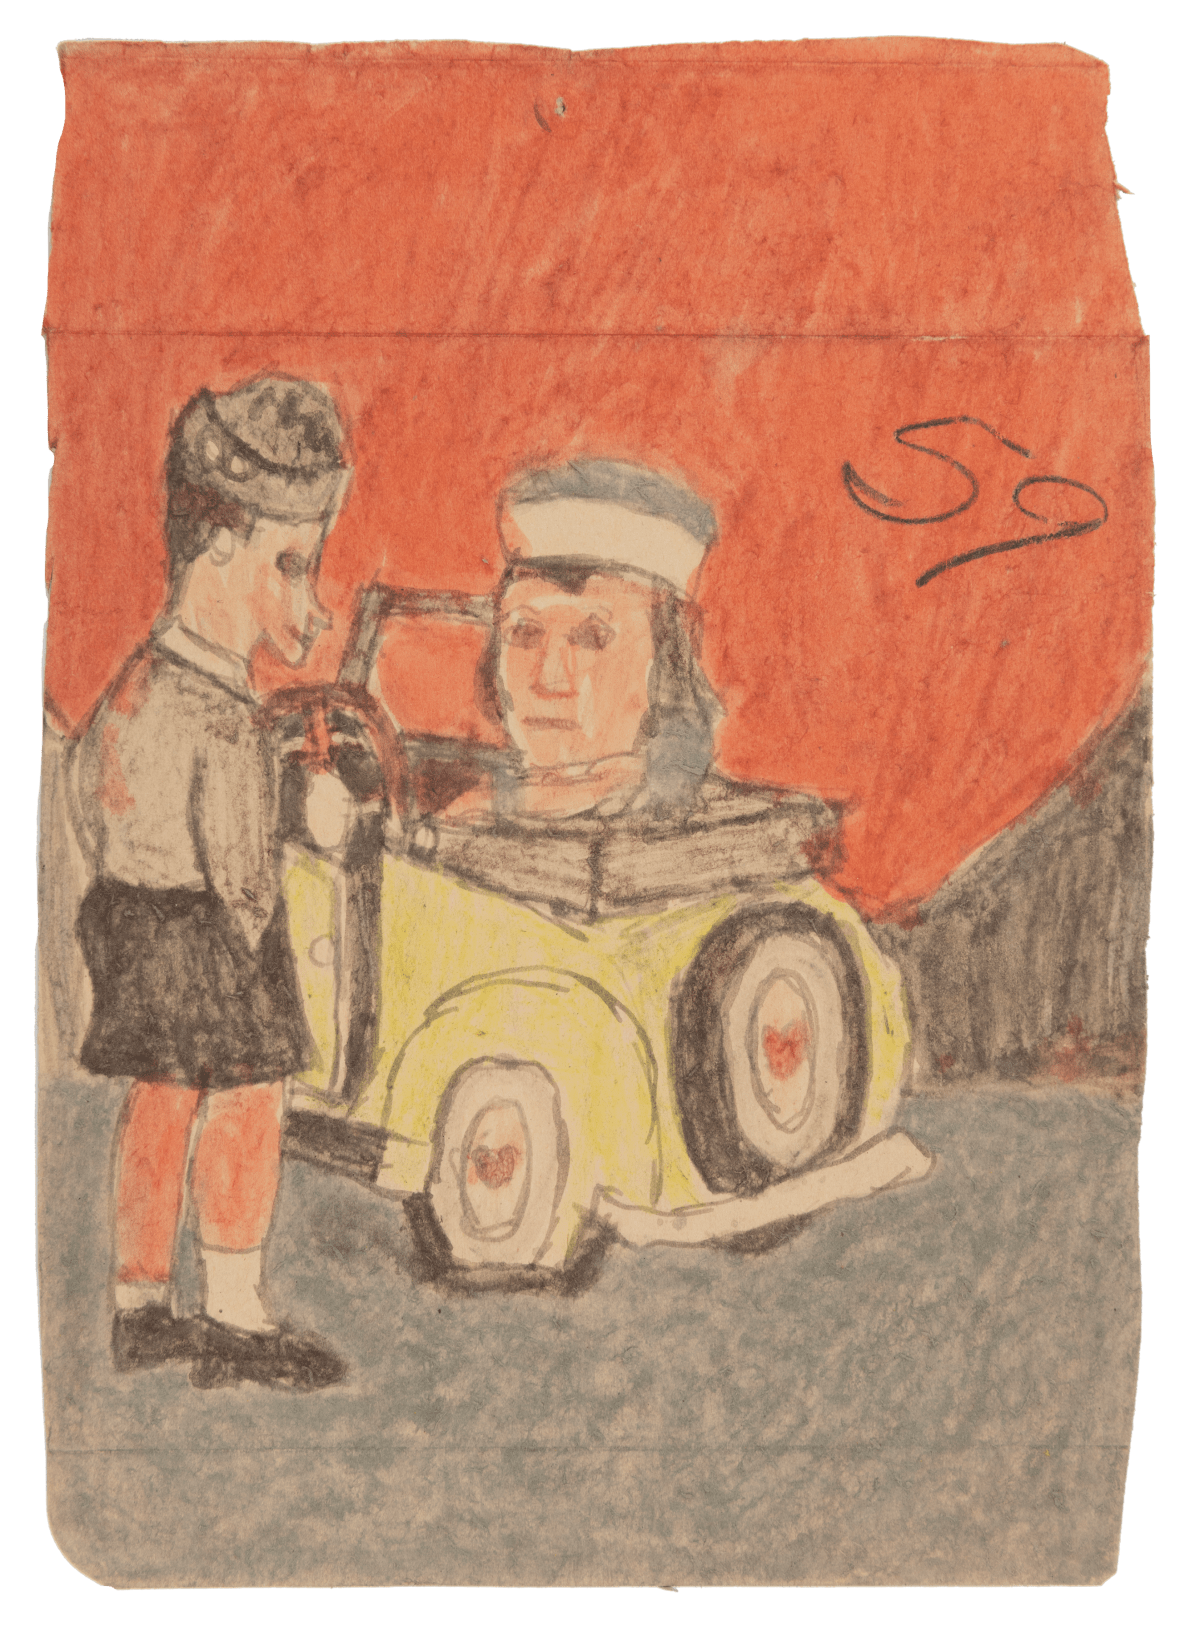 James Castle, Untitled (Yellow car and two figures), n.d.